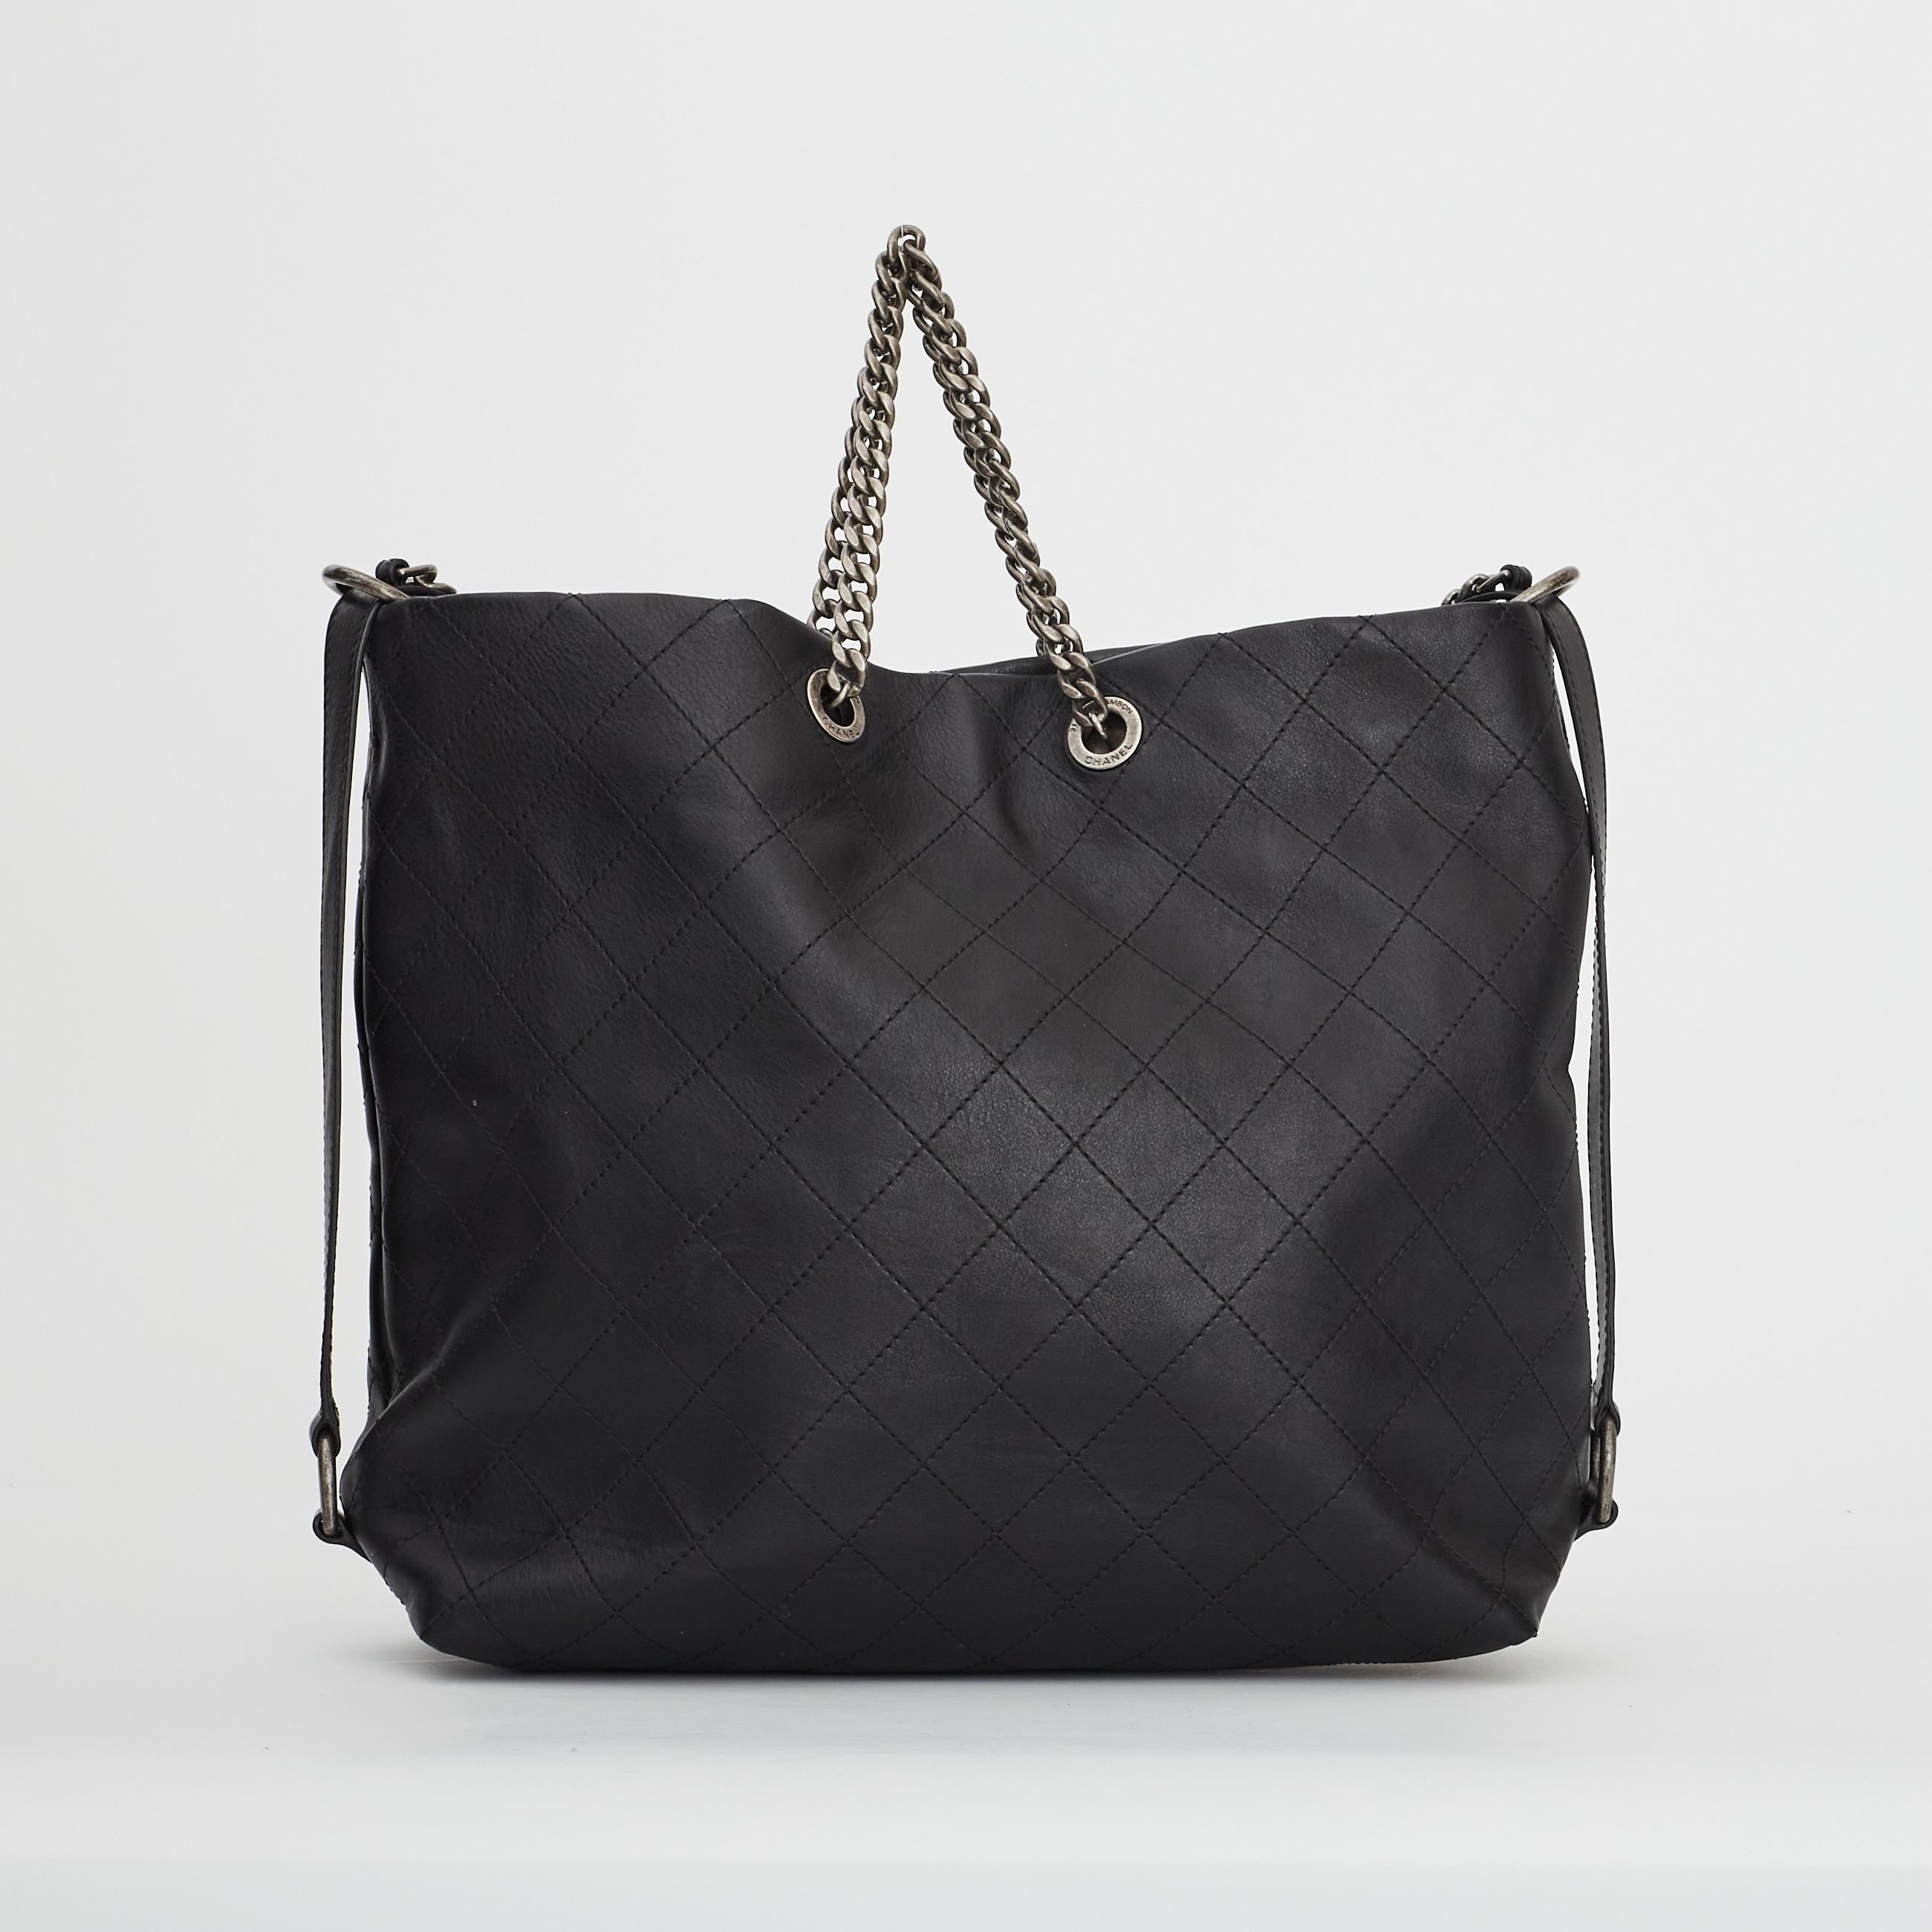 From the 2017 collection. This Chanel hobo bag is made with soft quilted calfskin leather in black with a slouching shape. The bag features ruthenium (gunmetal) hardware, a long flat leather shoulder or cross body strap, chain top handles, a